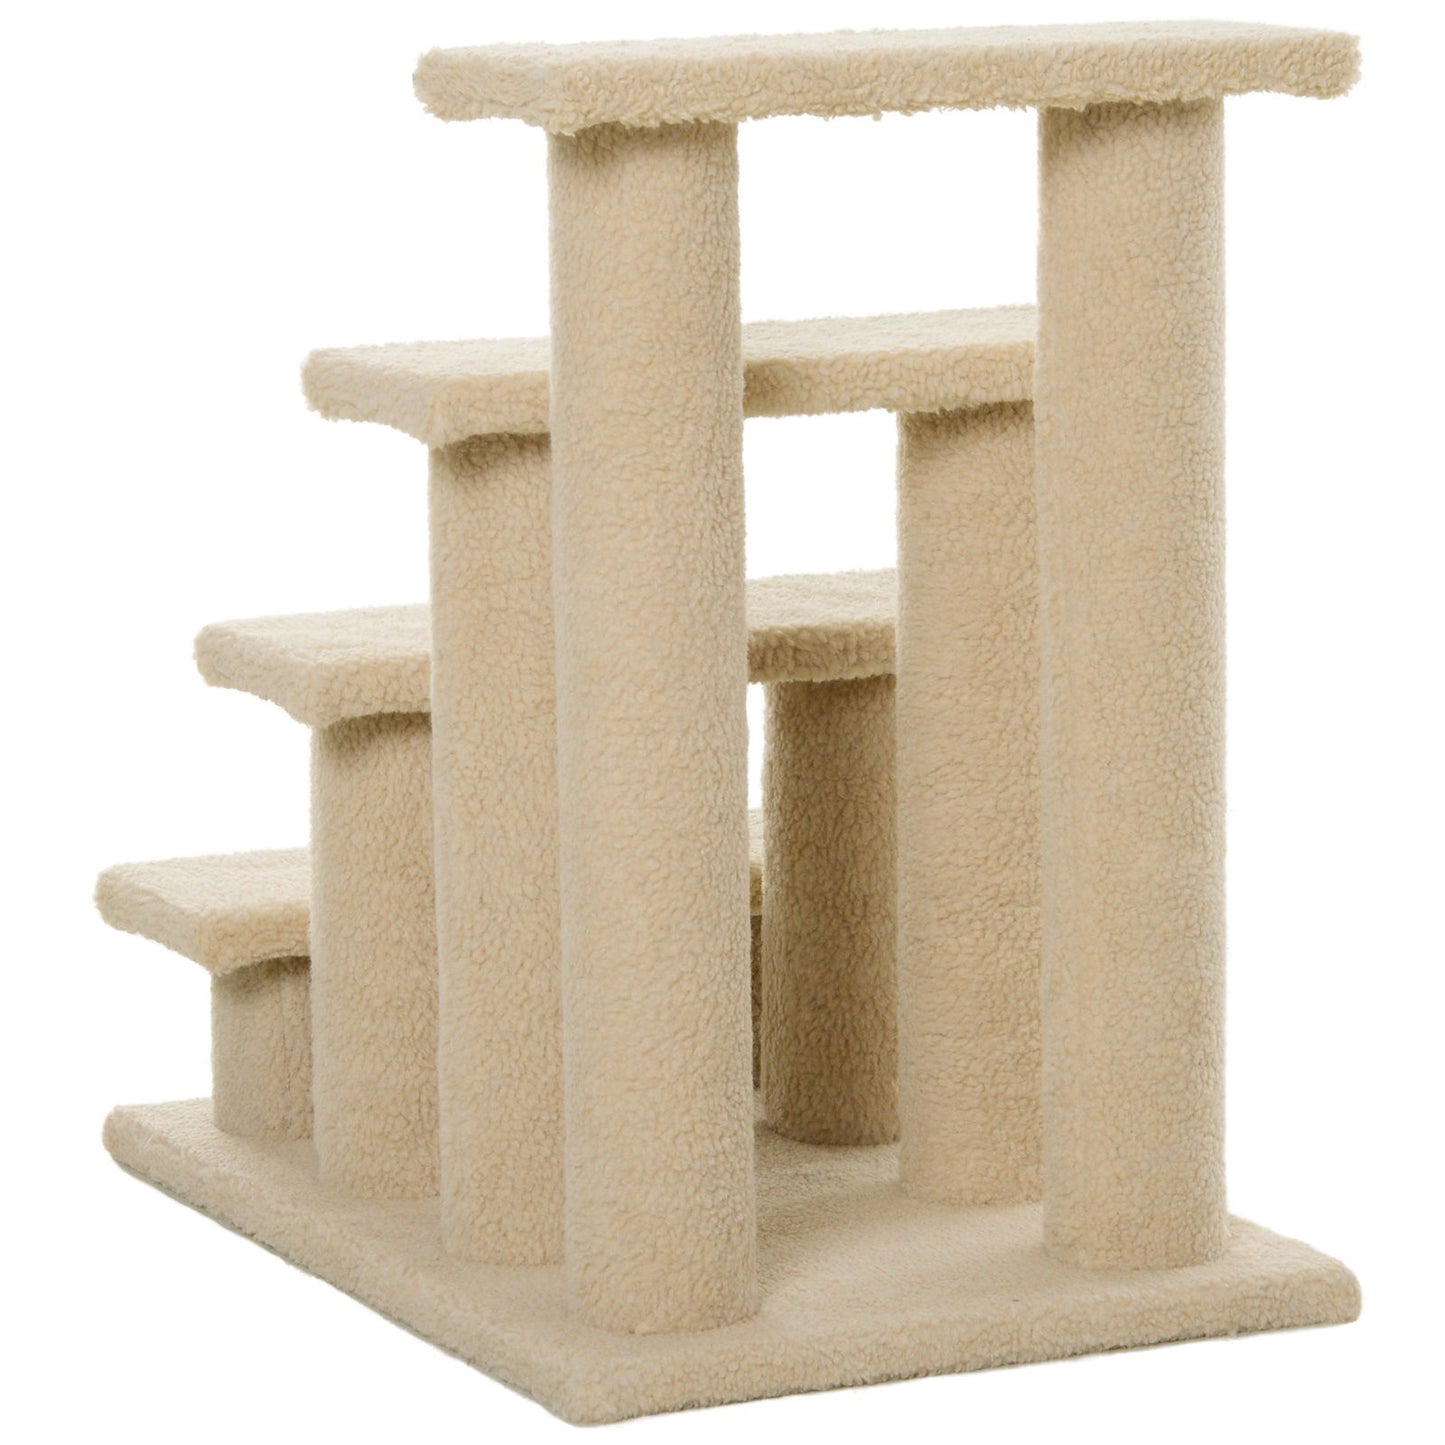 Nancy's Ernesto Animal stairs Cat stairs Dog stairs Stairs for cats and dogs 4 steps